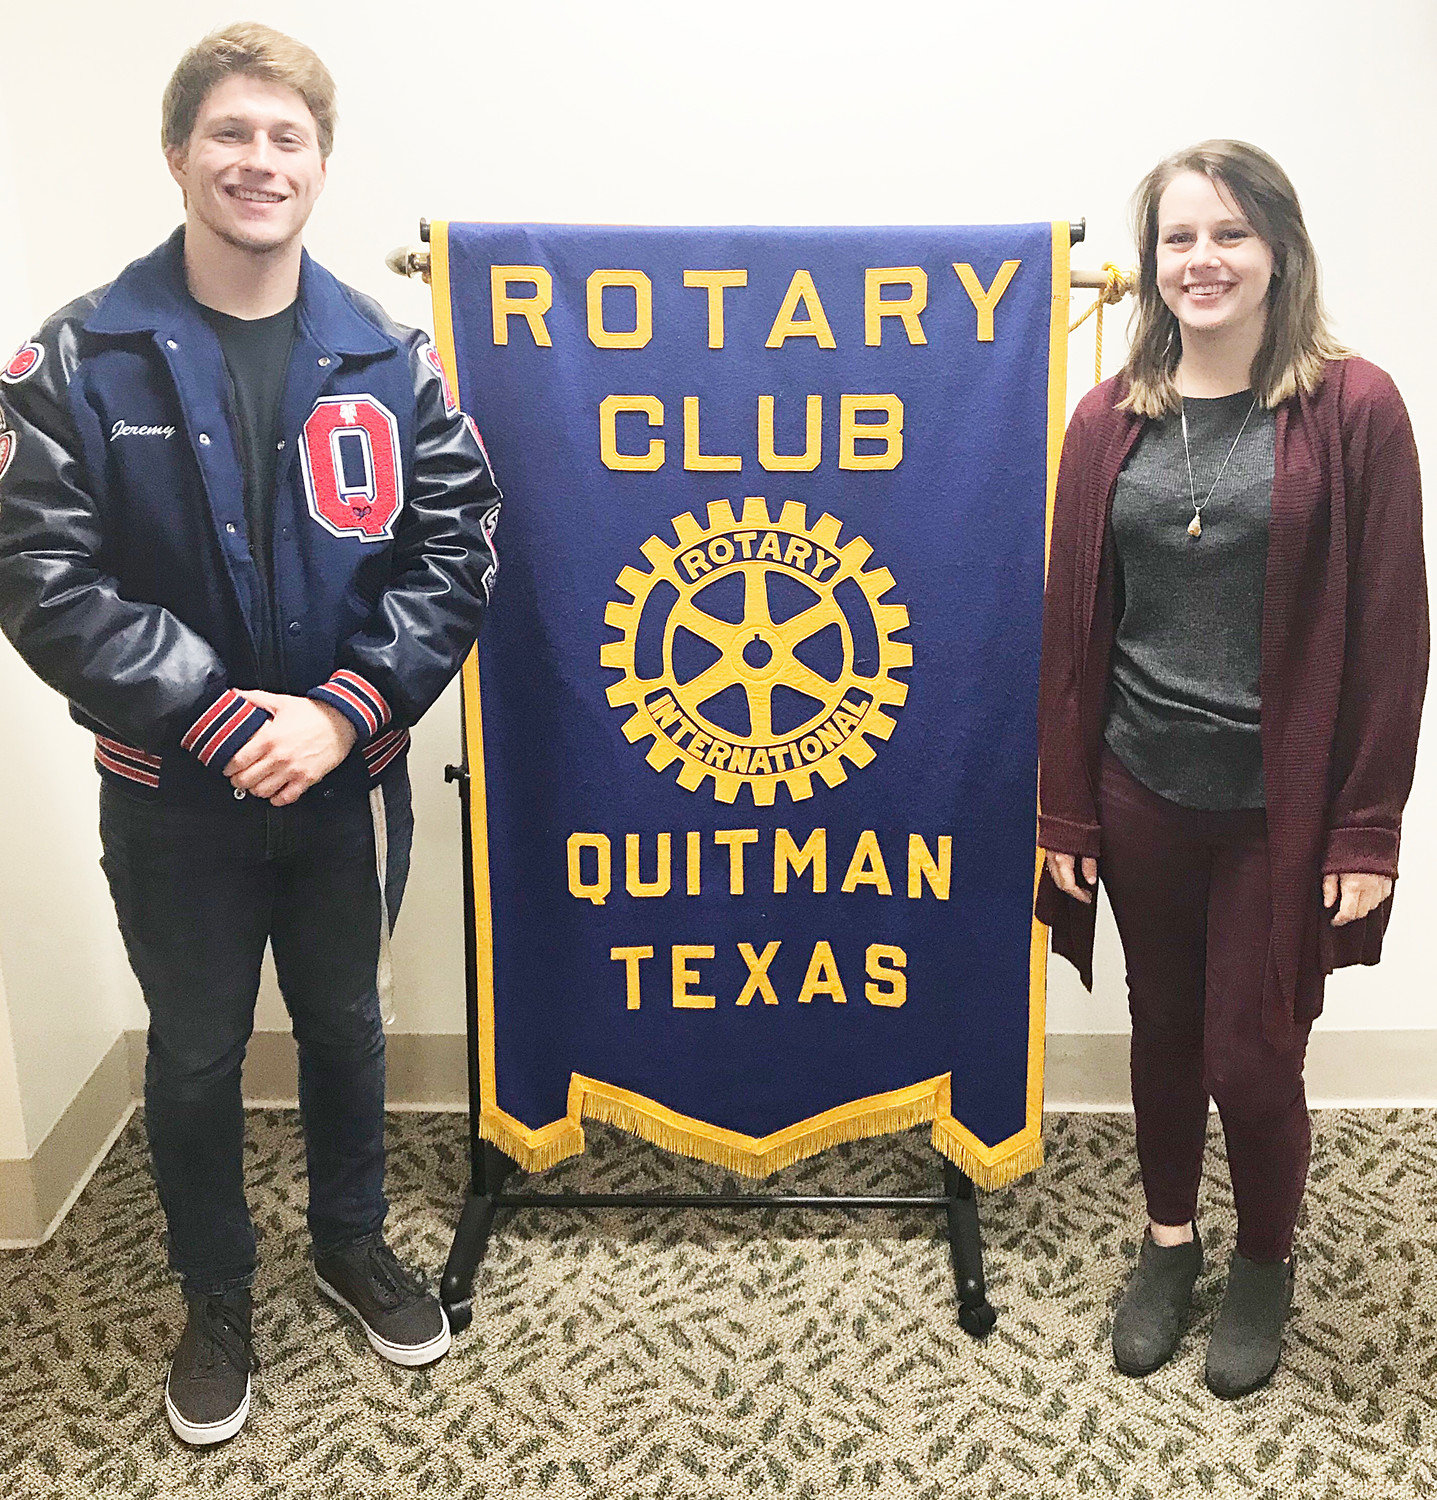 Jeremy Peek (left) and Riley Cameron (right) were selected as the Quitman Rotary students of the month for October.